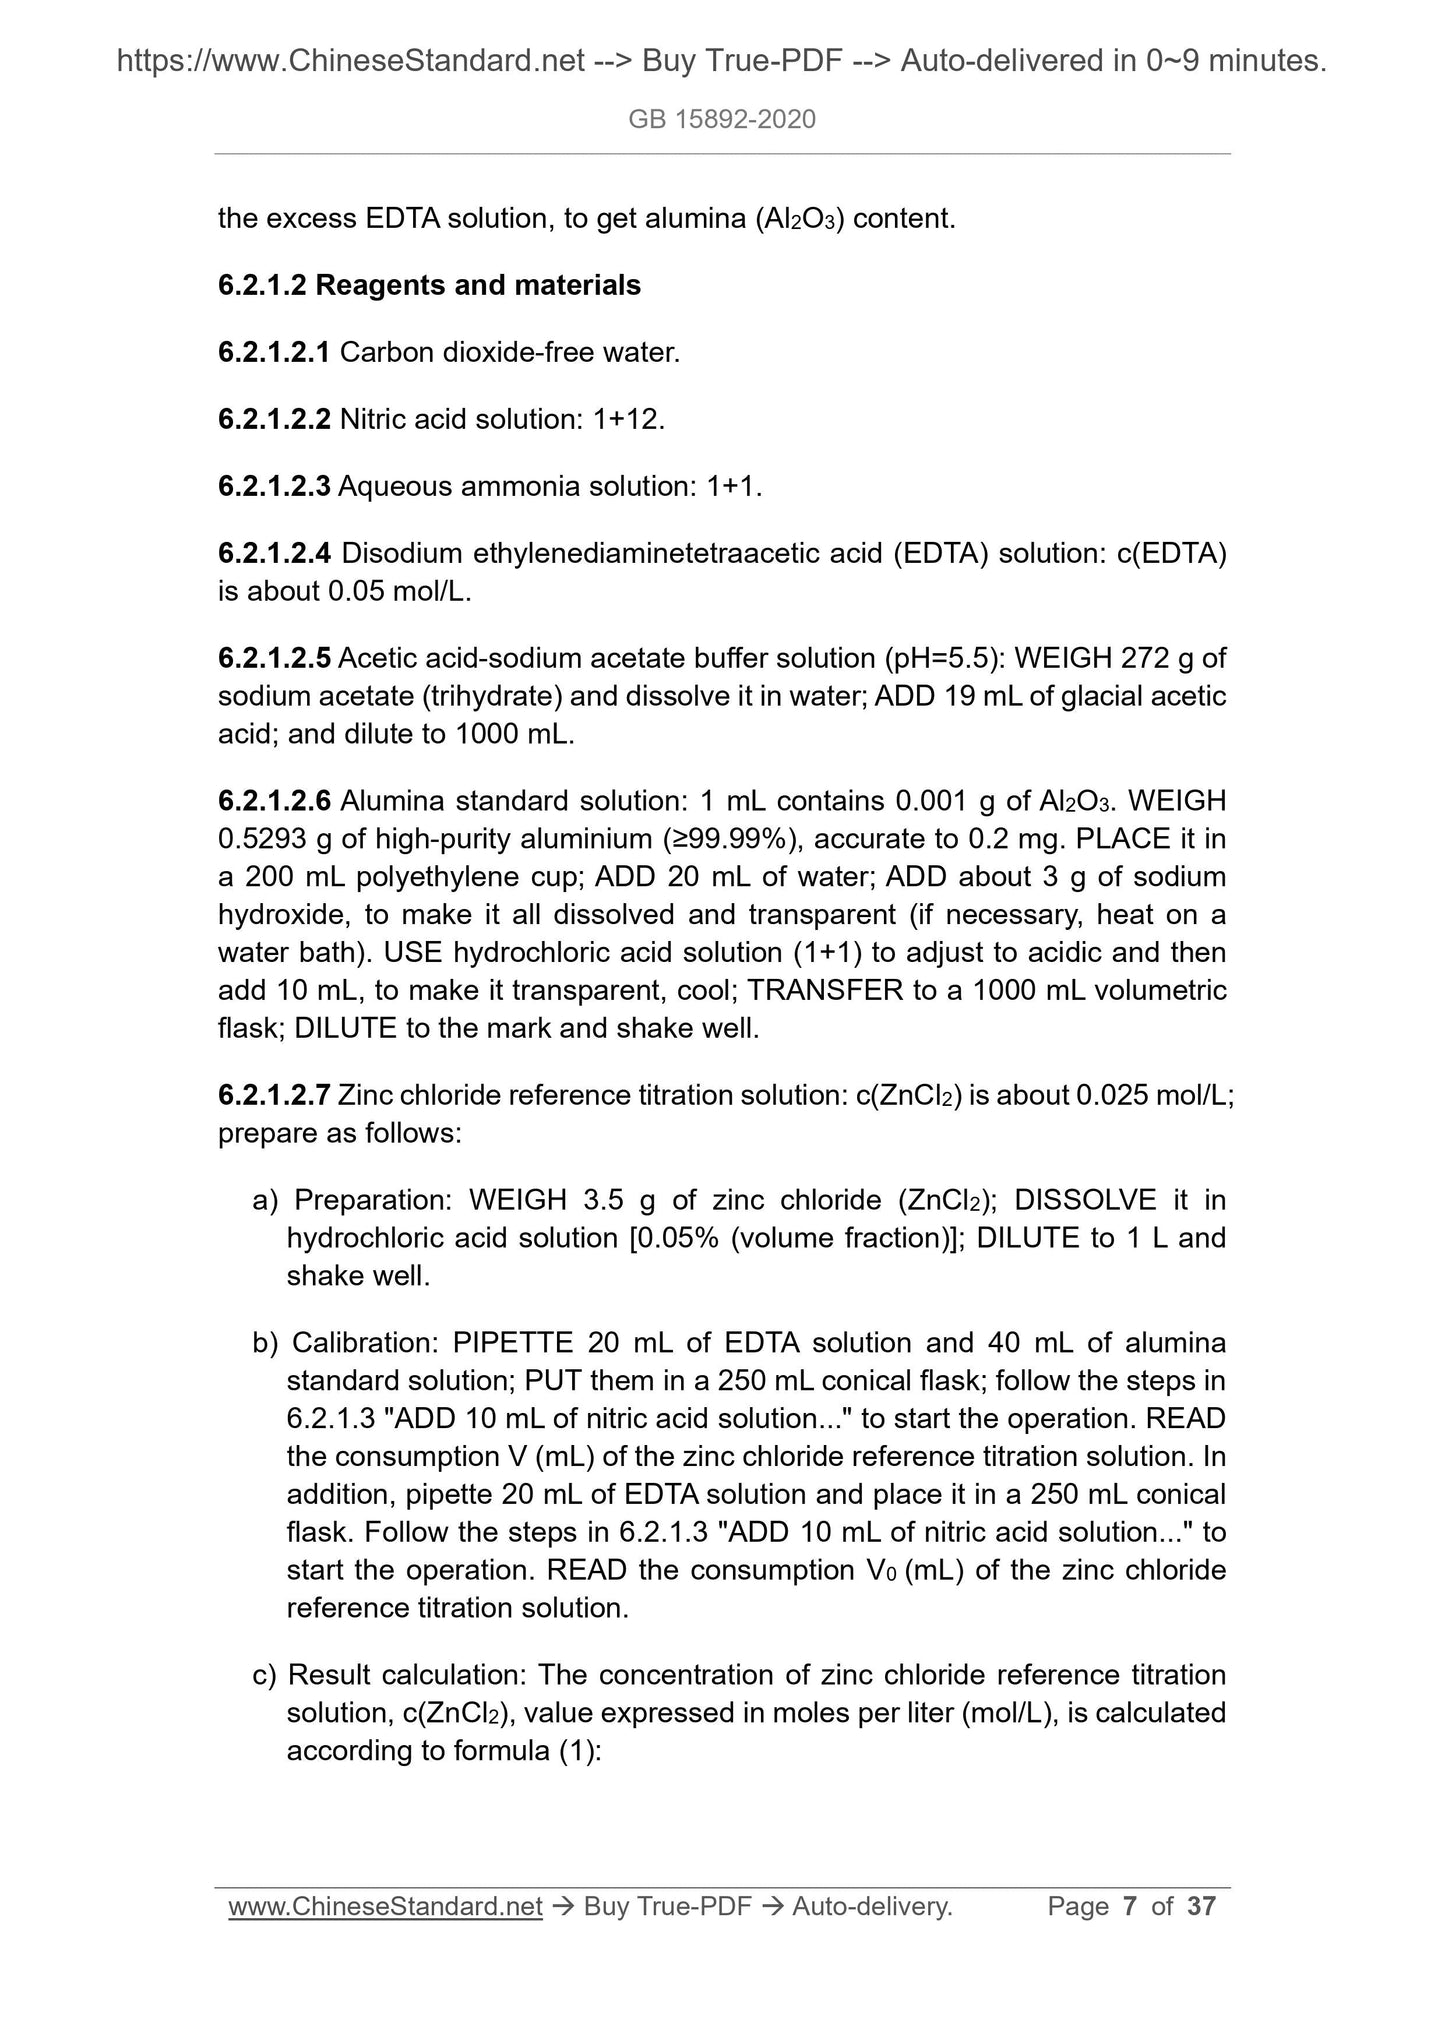 GB 15892-2020 Page 4